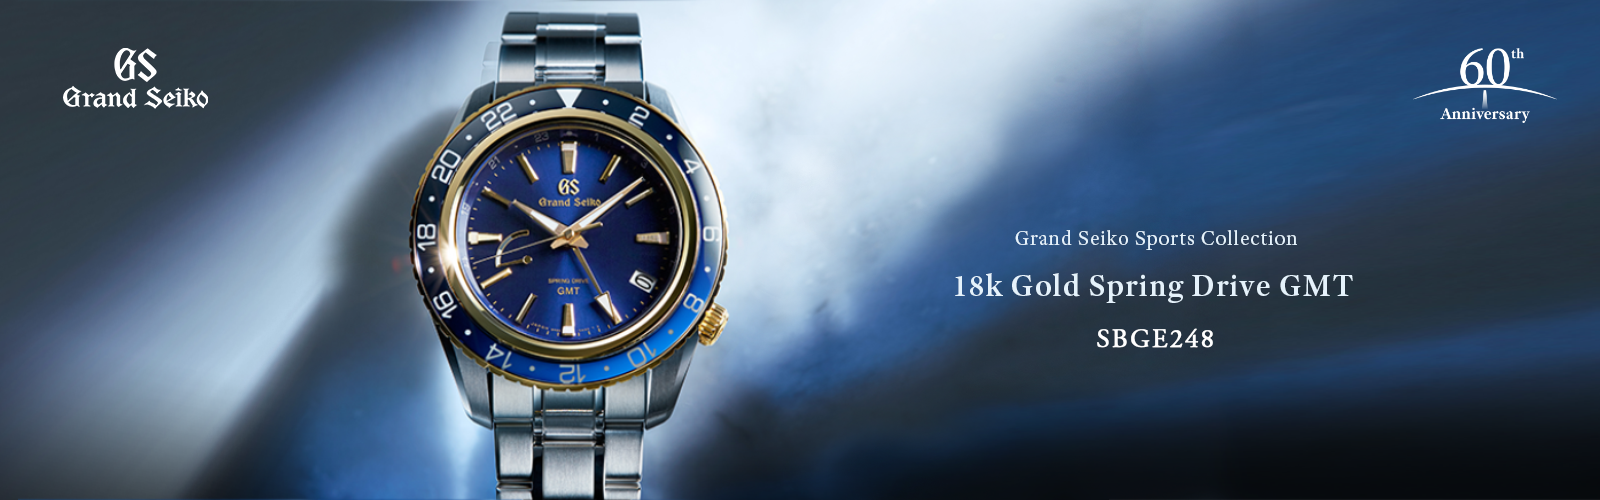 Grand Seiko-Recommendation on Watches | City Chain Official Website